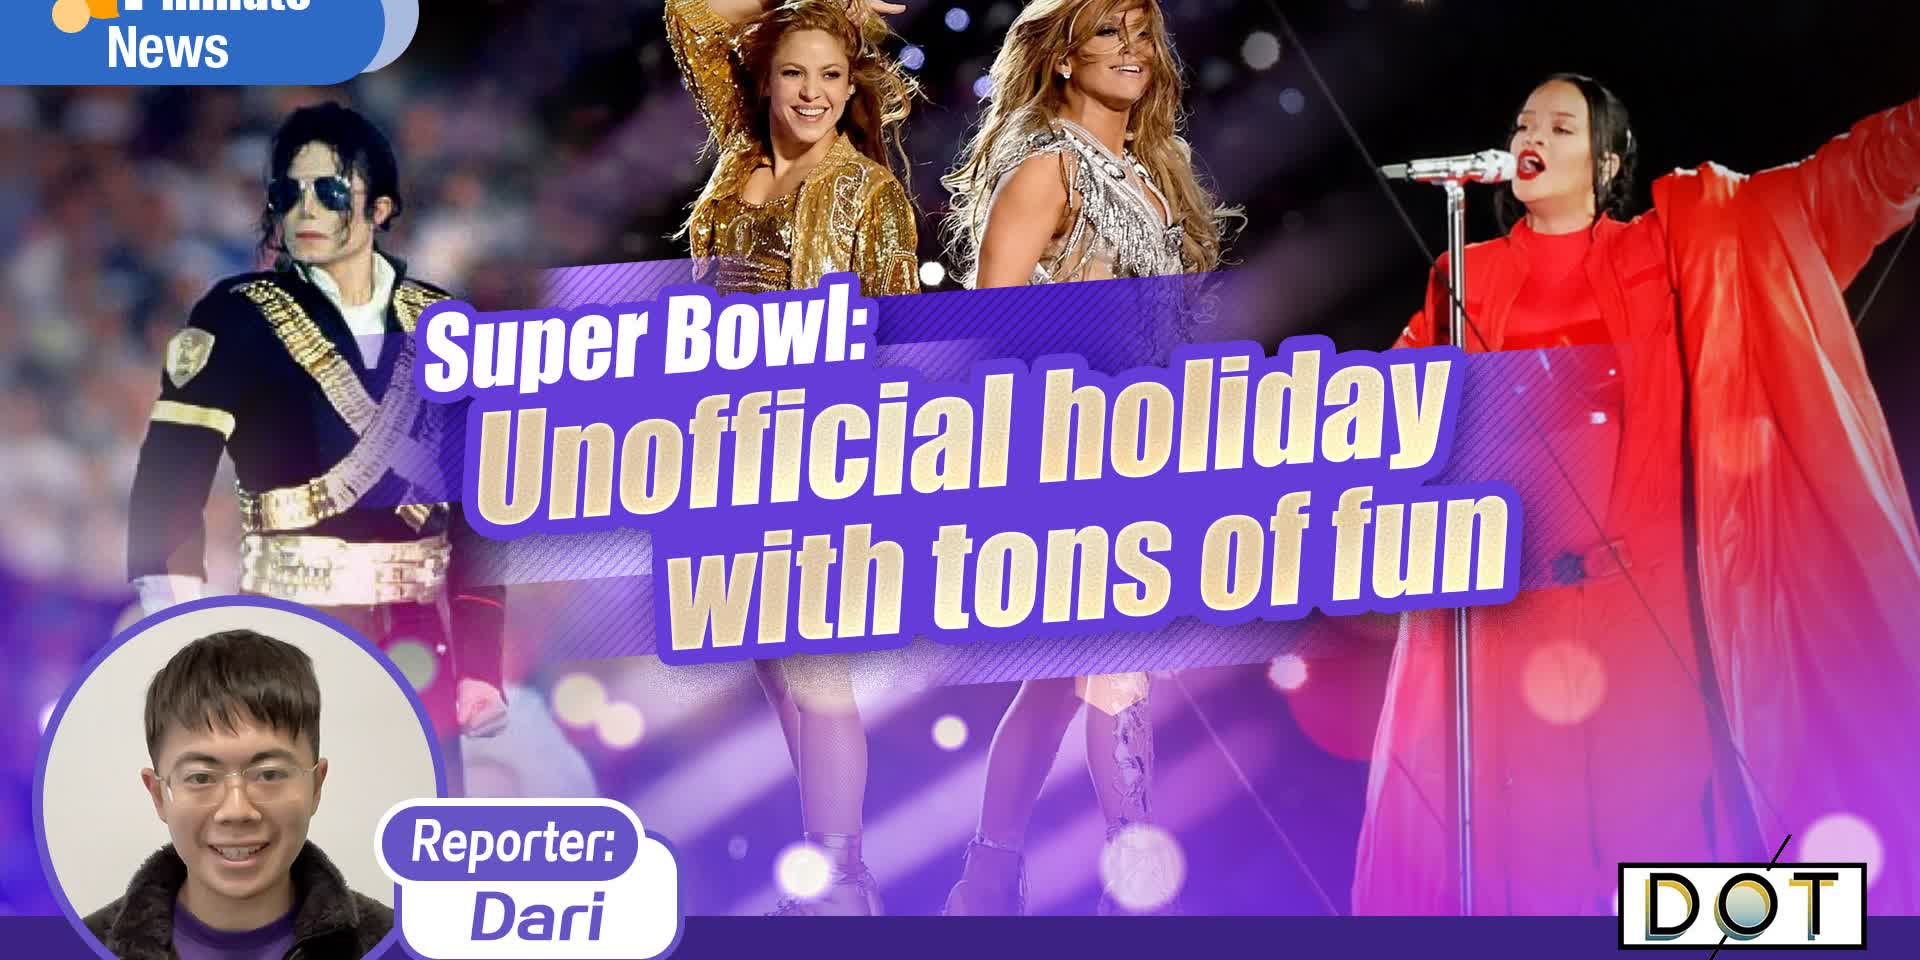 1-minute News | Super Bowl: Unofficial holiday with tons of fun